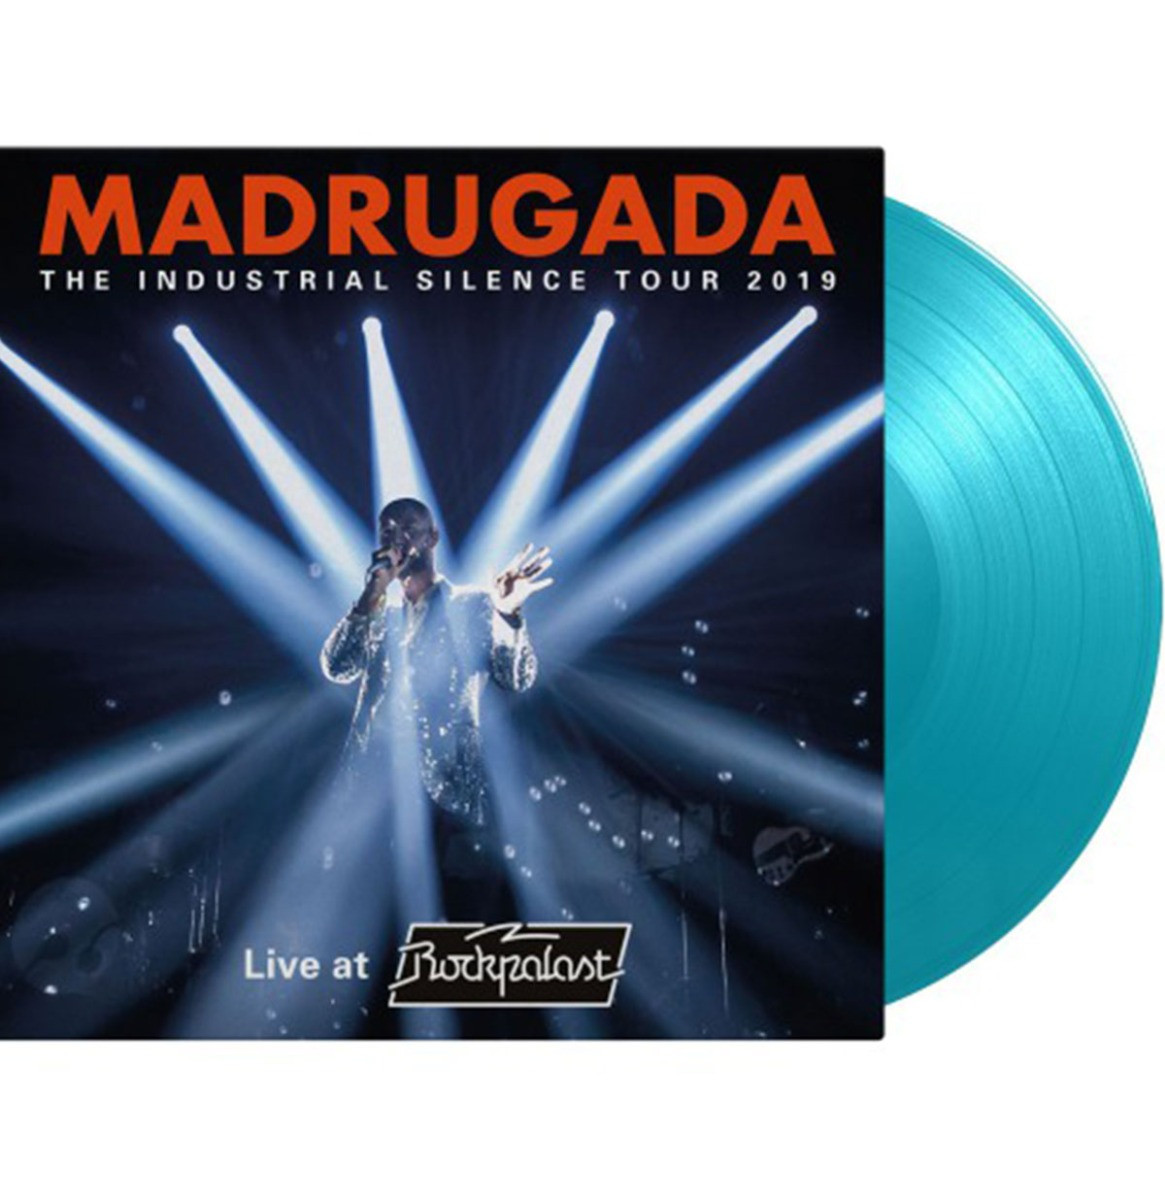 Madrugada - The Industrial Silence Tour 2019 (Turquoise Vinyl) 3LP